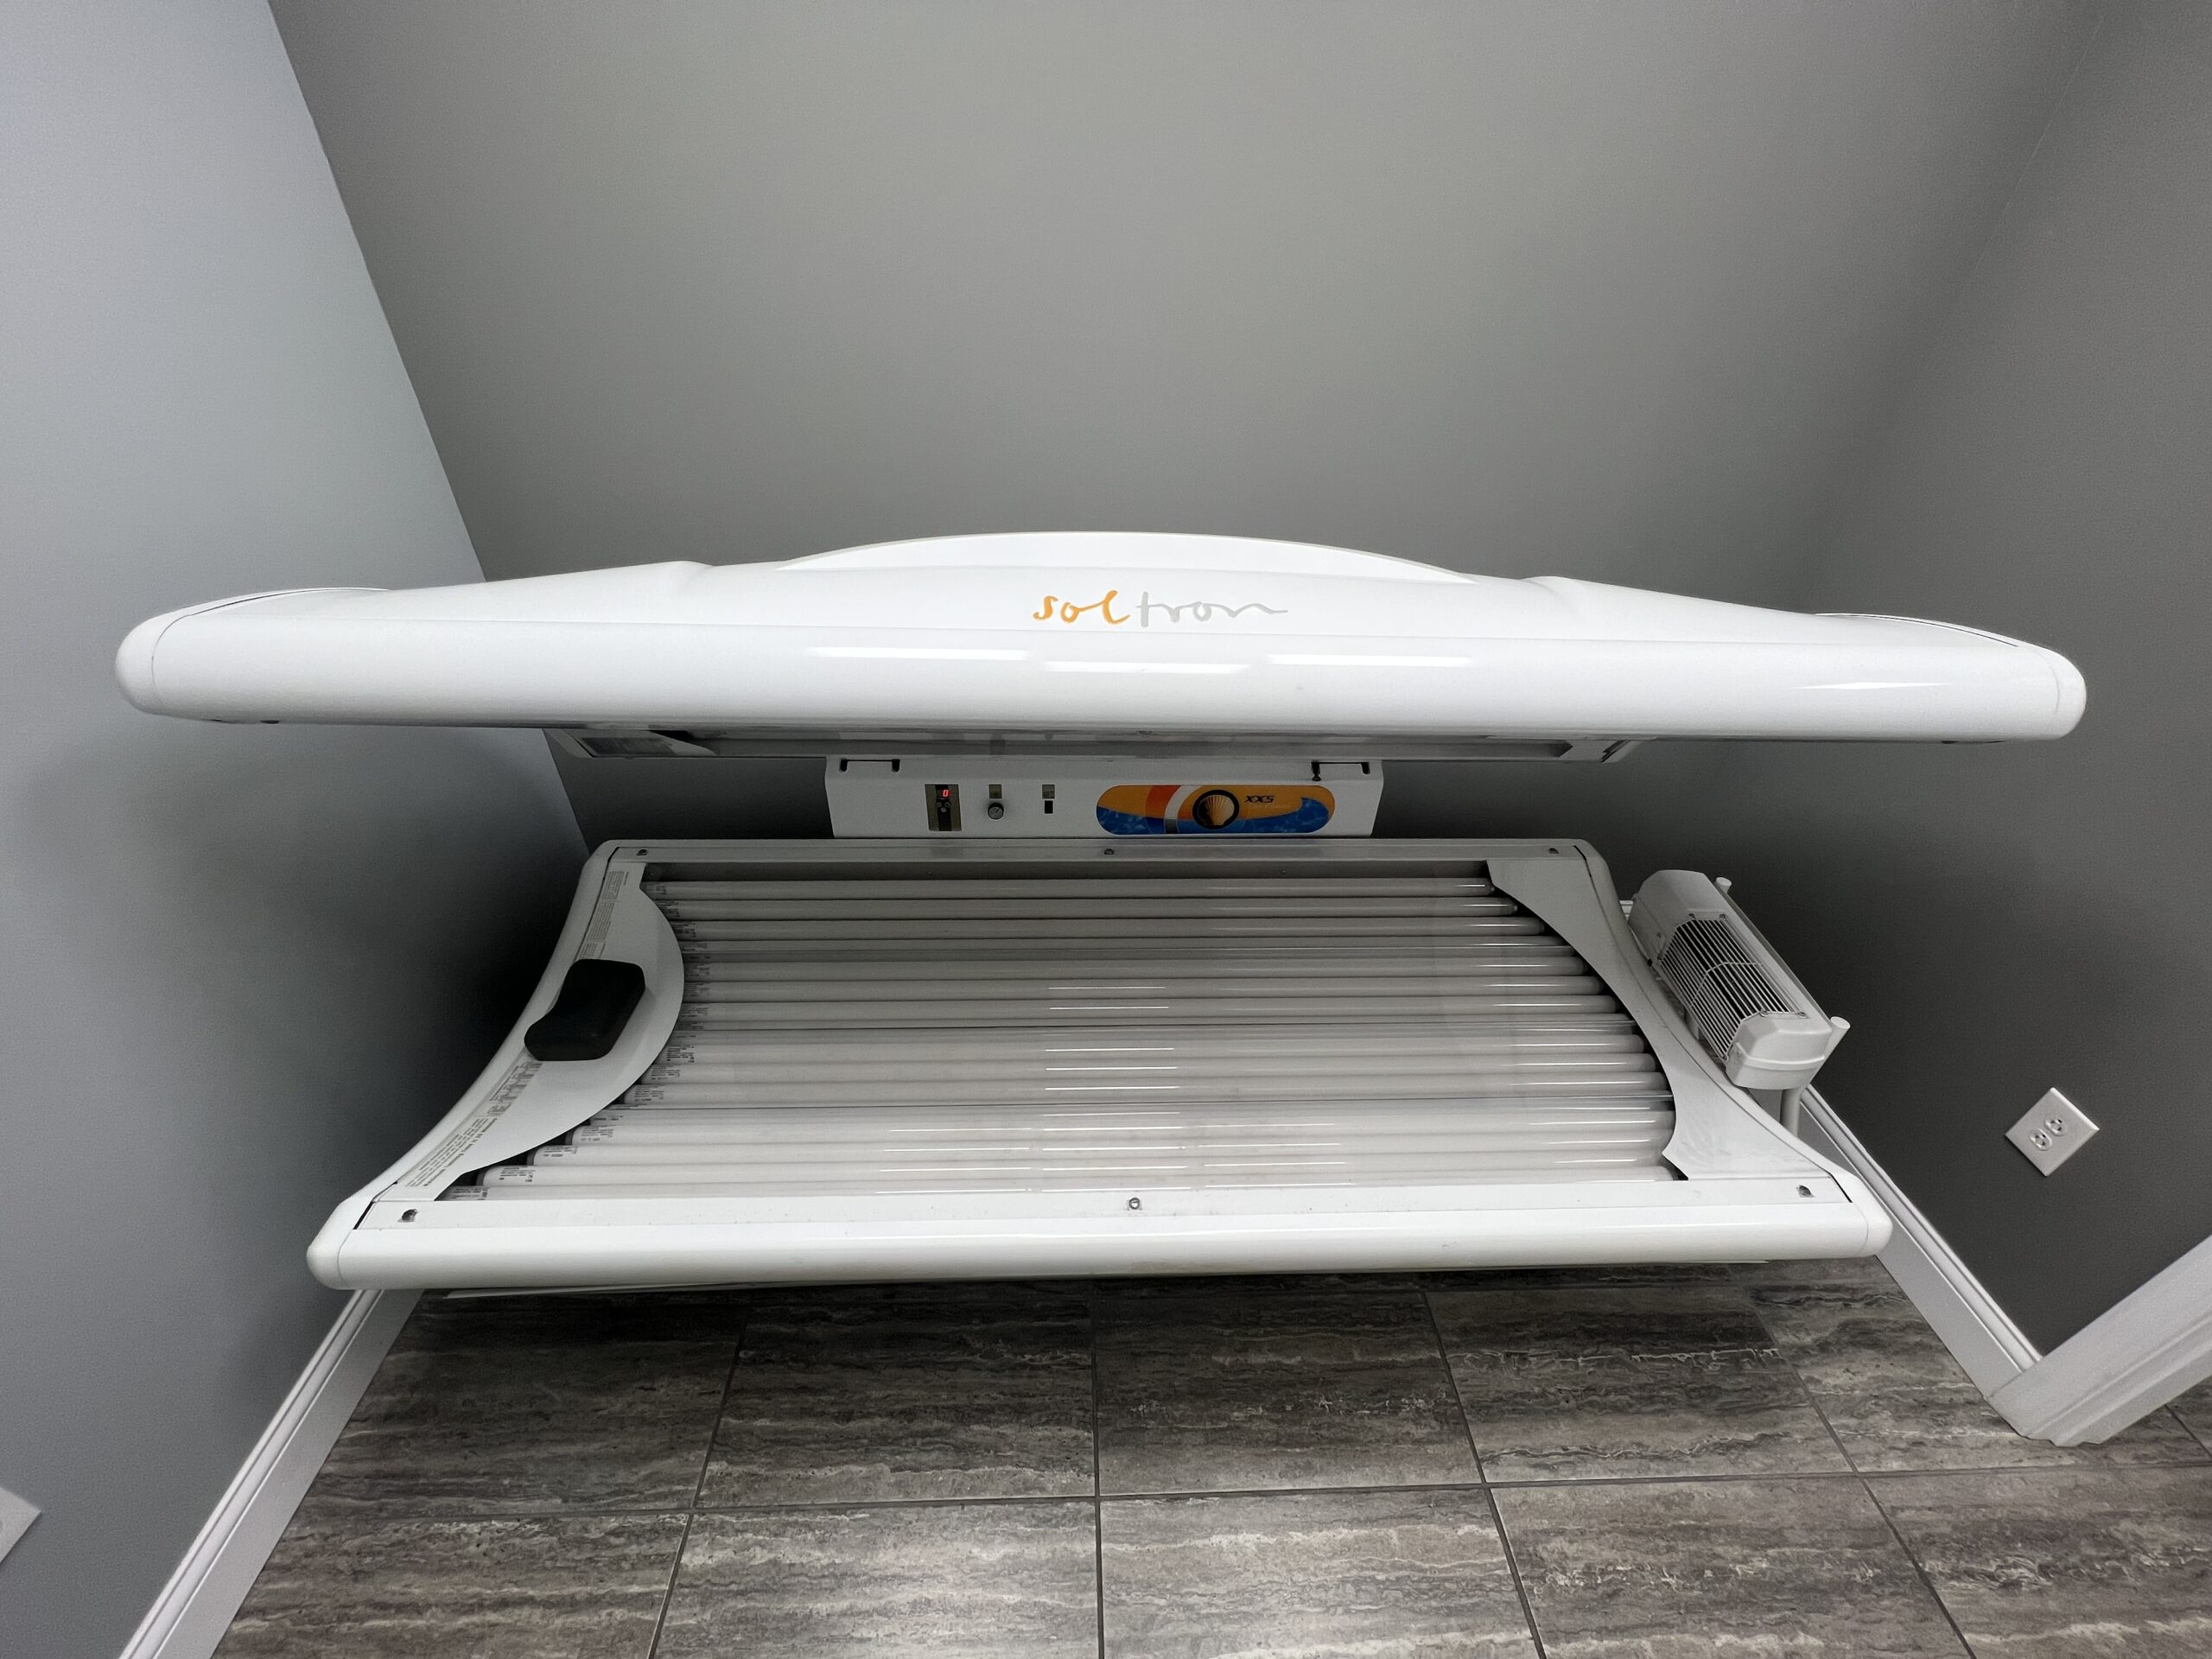 Sleek Soltron tanning bed at Key Largo Tan & Spa, East Alton, IL, offering a premium and efficient tanning solution for a sun-kissed look.